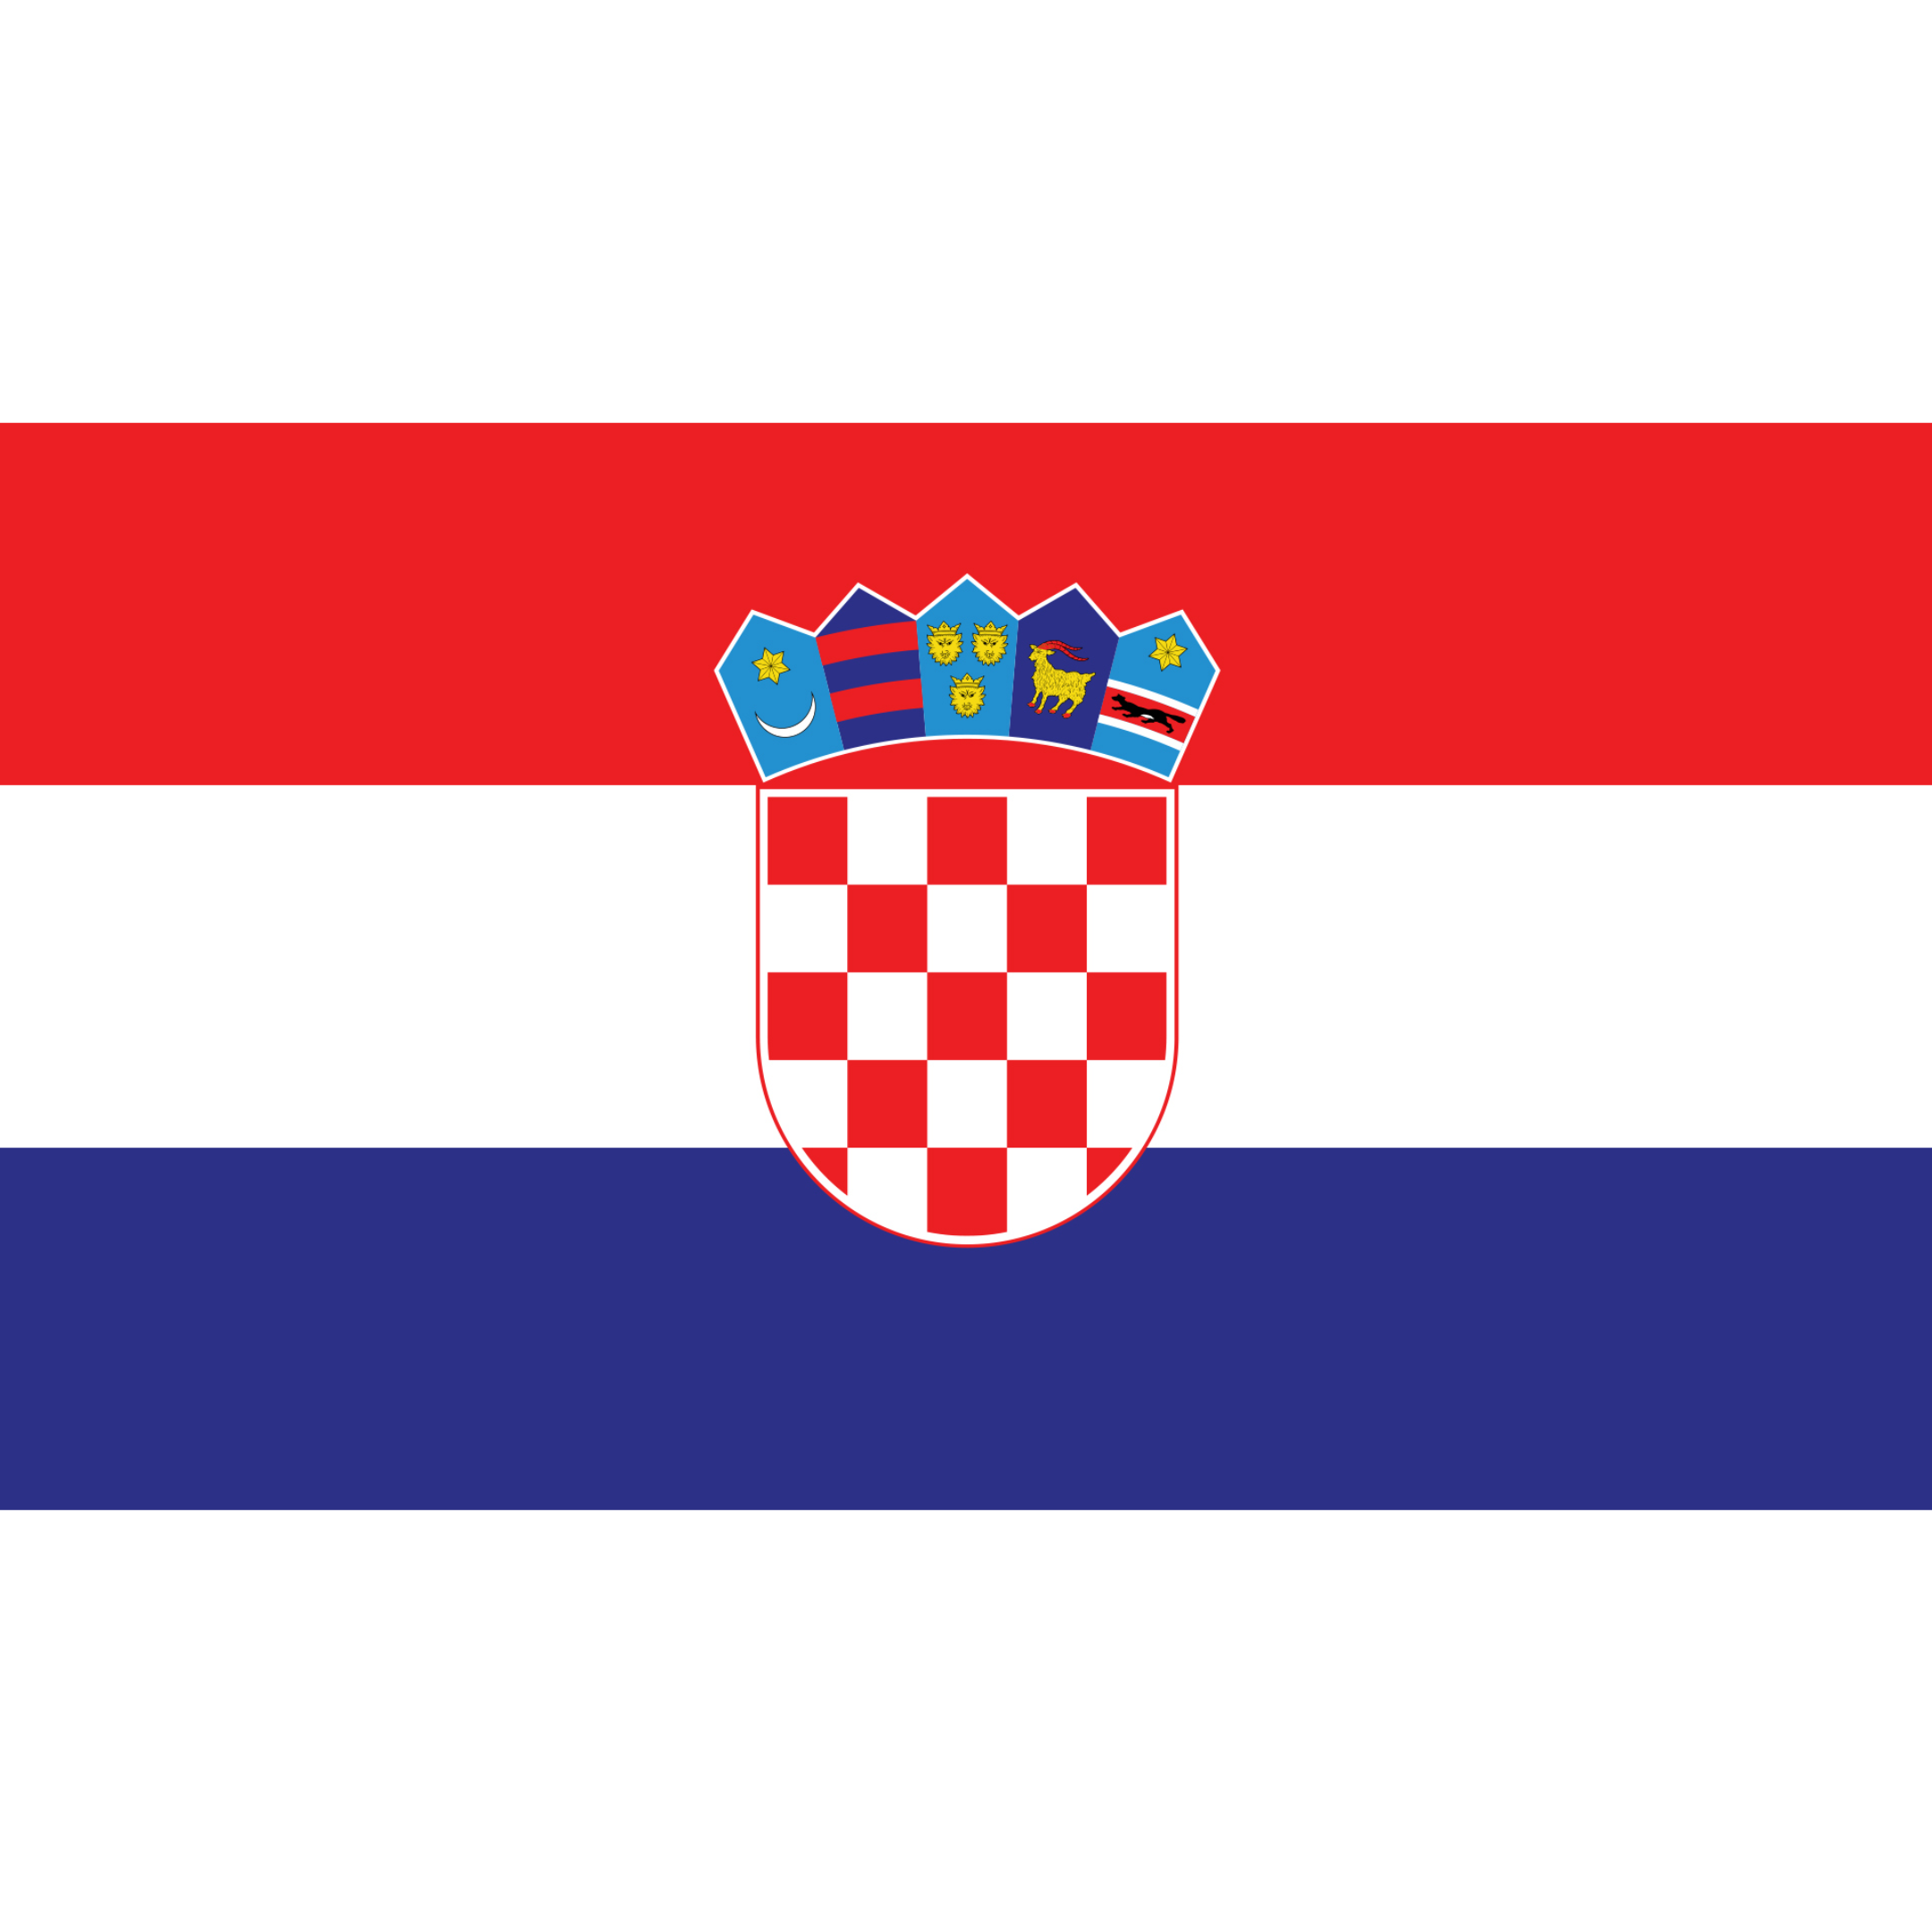 The Croatian flag consists of 3 equal horizontal bands in red, white and blue with the coat of arms of Croatia in the middle.